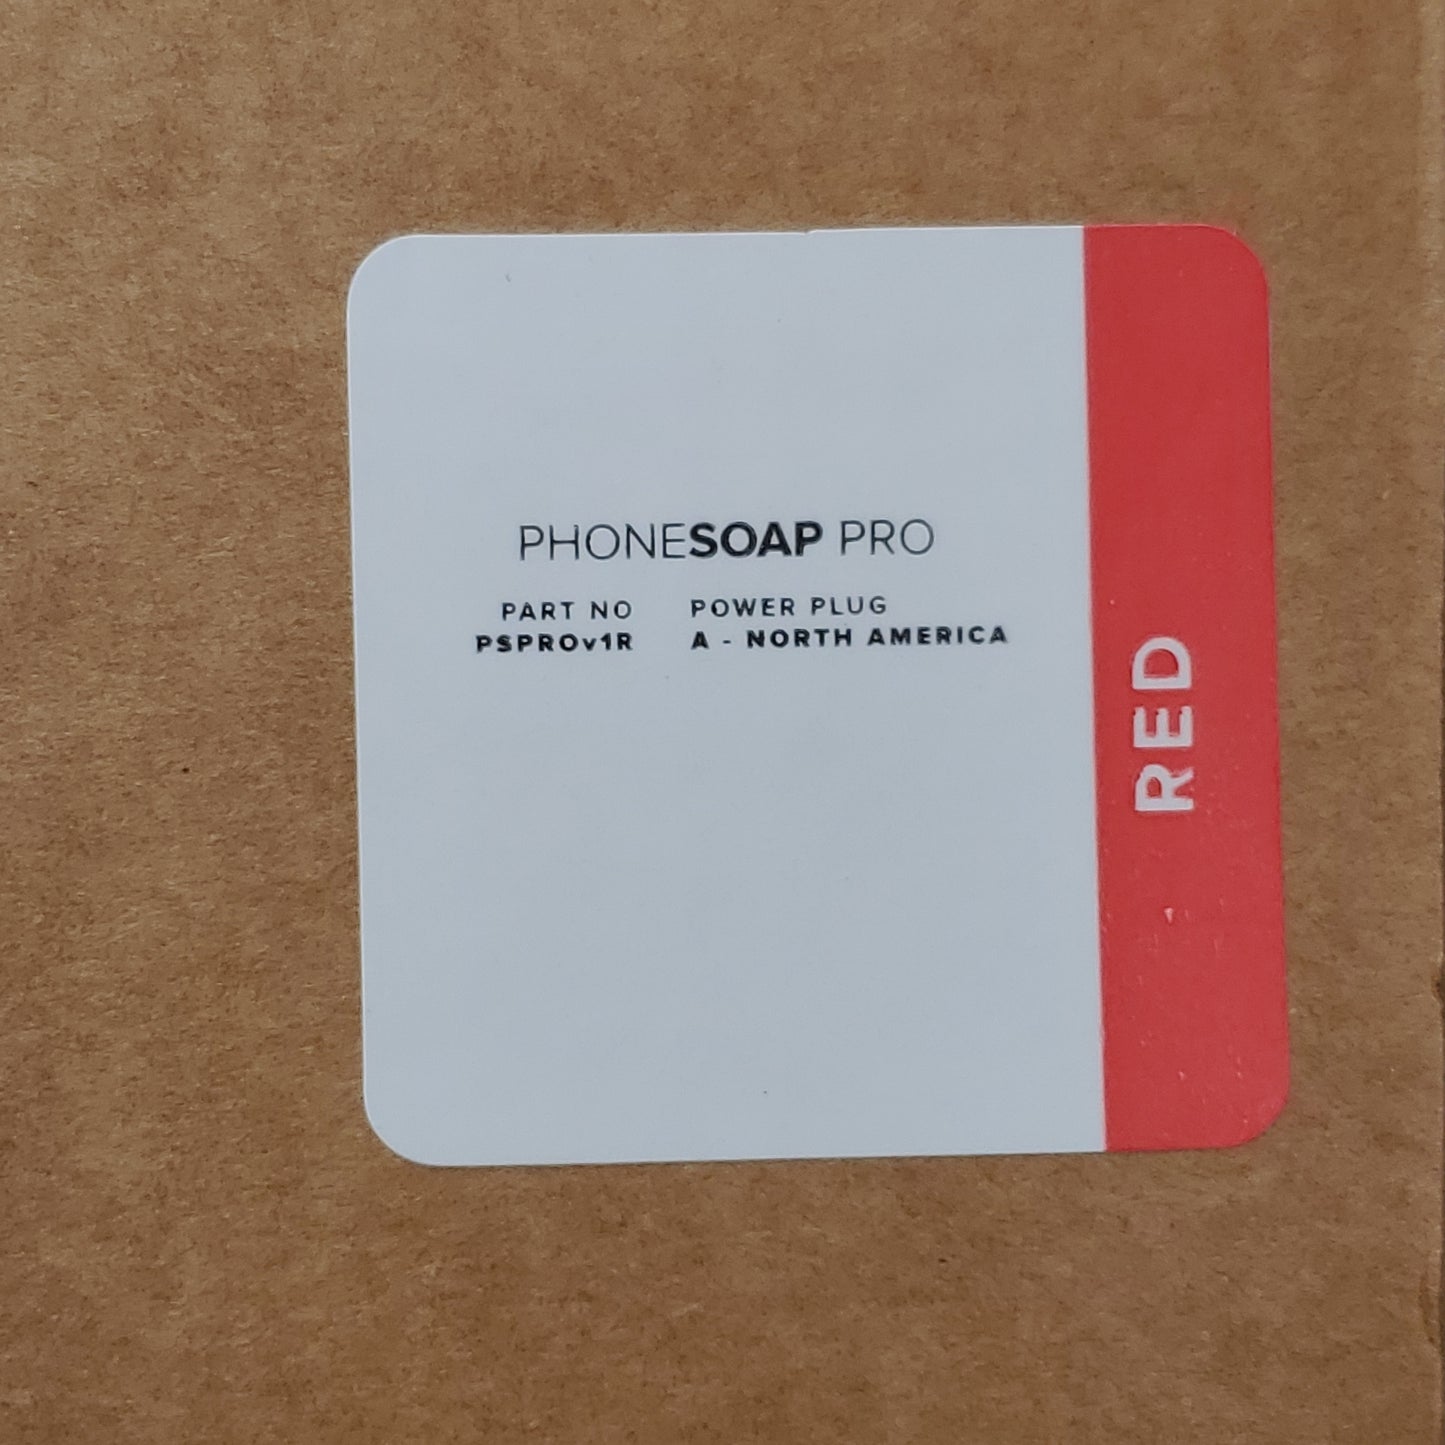 PHONESOAP PRO Rapid UV Sanitizer and Charger Red PSPROV1R (New)